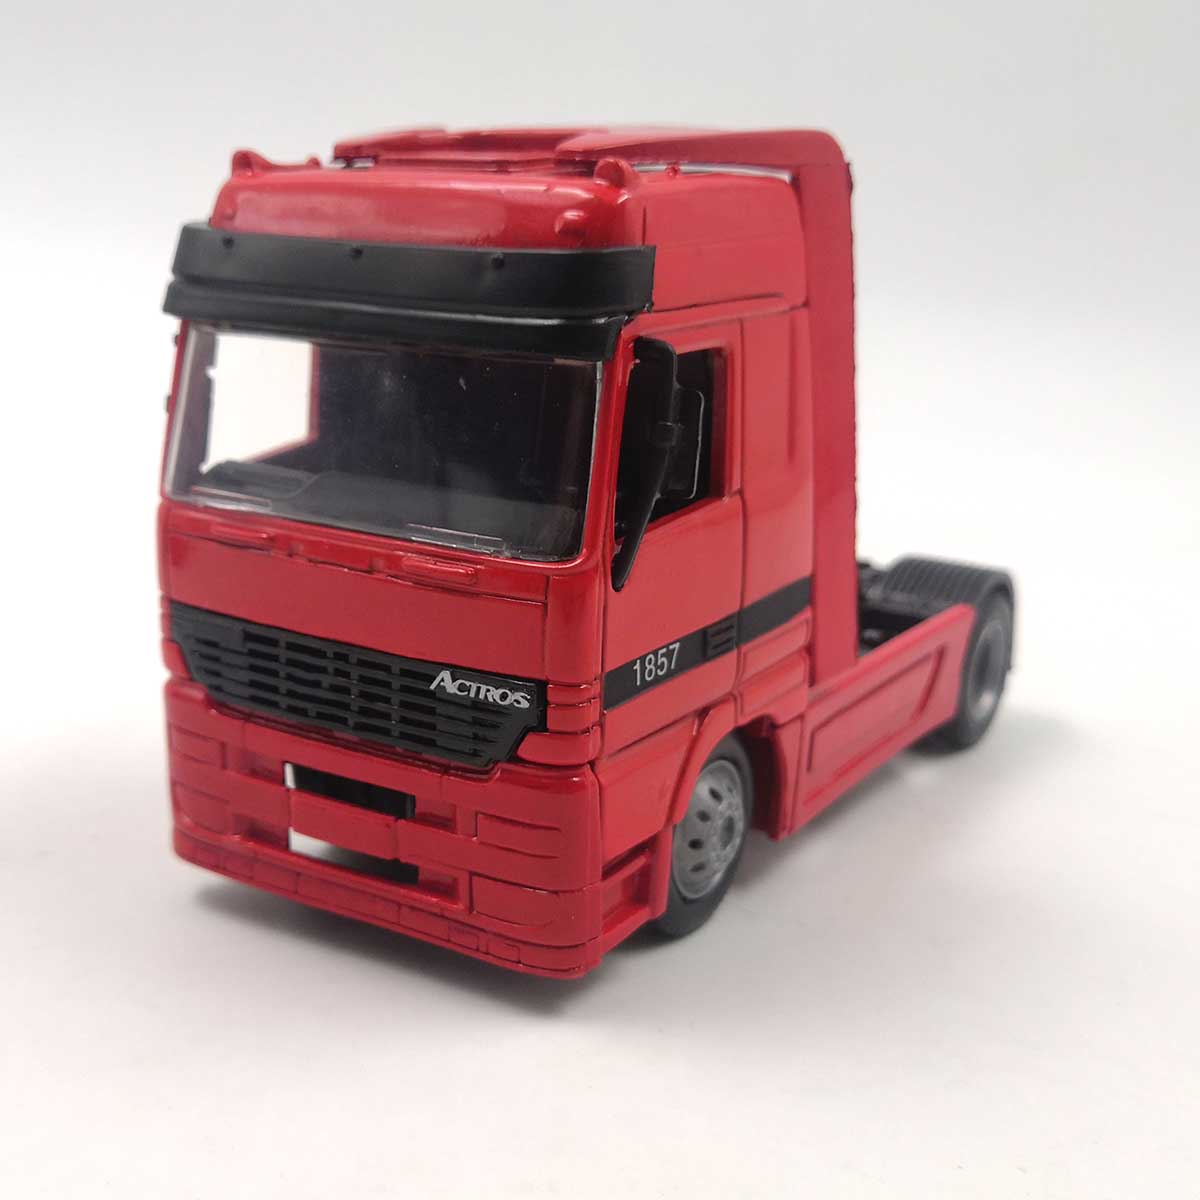 1: 43 Scale Die Casting Alloy Renault Truck Metal Truck Toy Scene Model Collect Display Decorations Gifts for Children